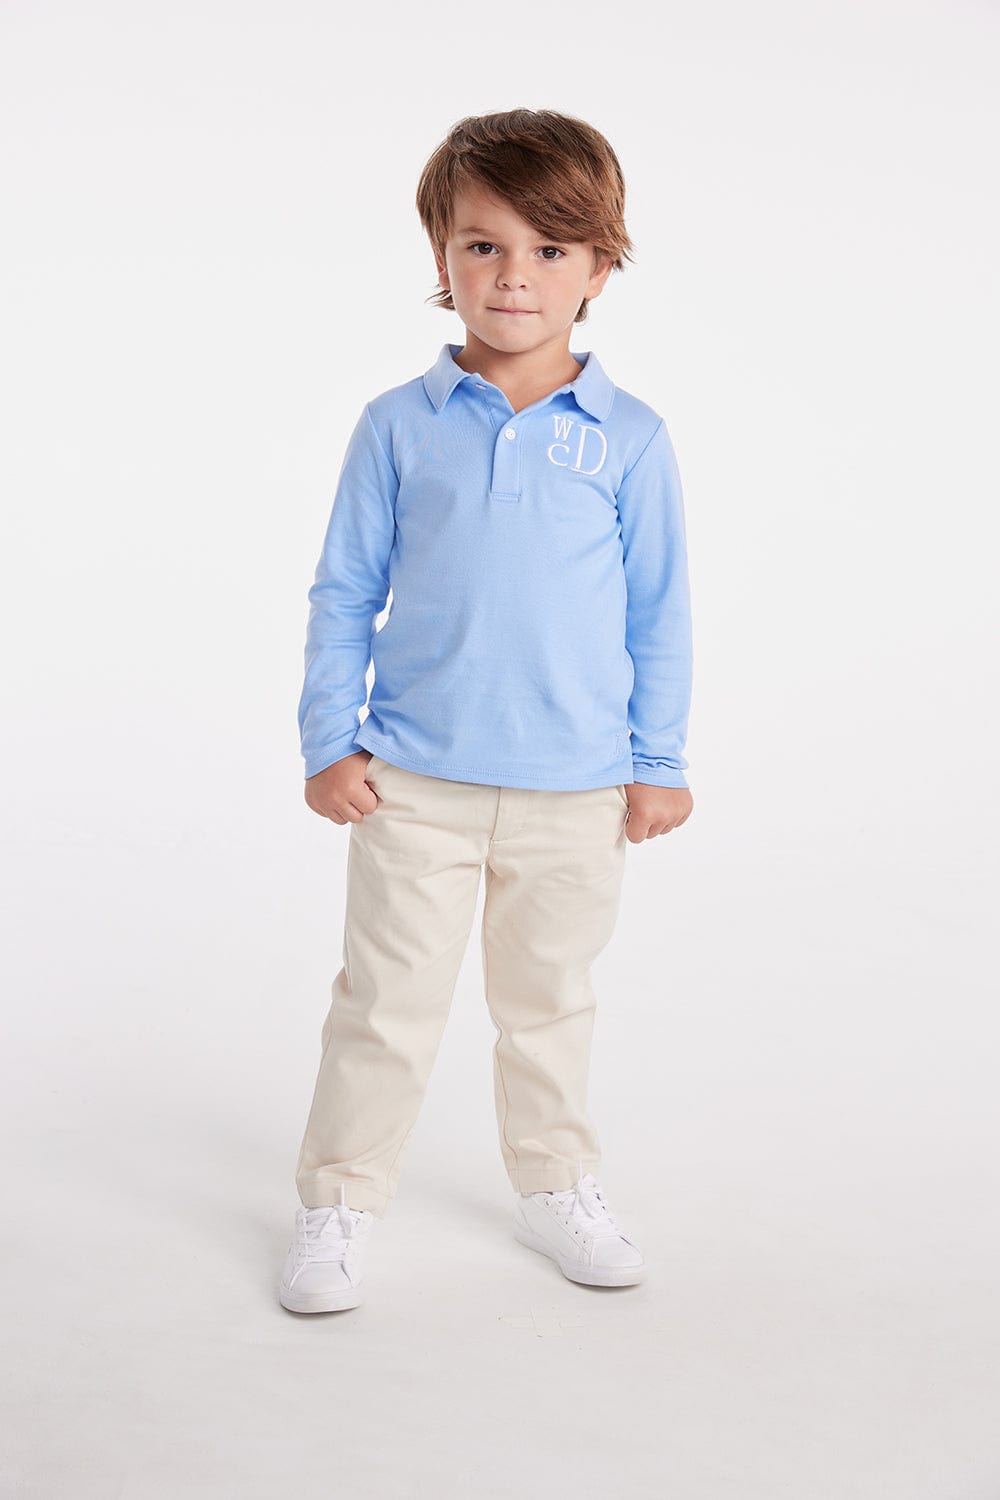 myndighed Perth Blackborough Skygge Kids Long Sleeve Polo - Monogrammed Boys Clothes – Little English